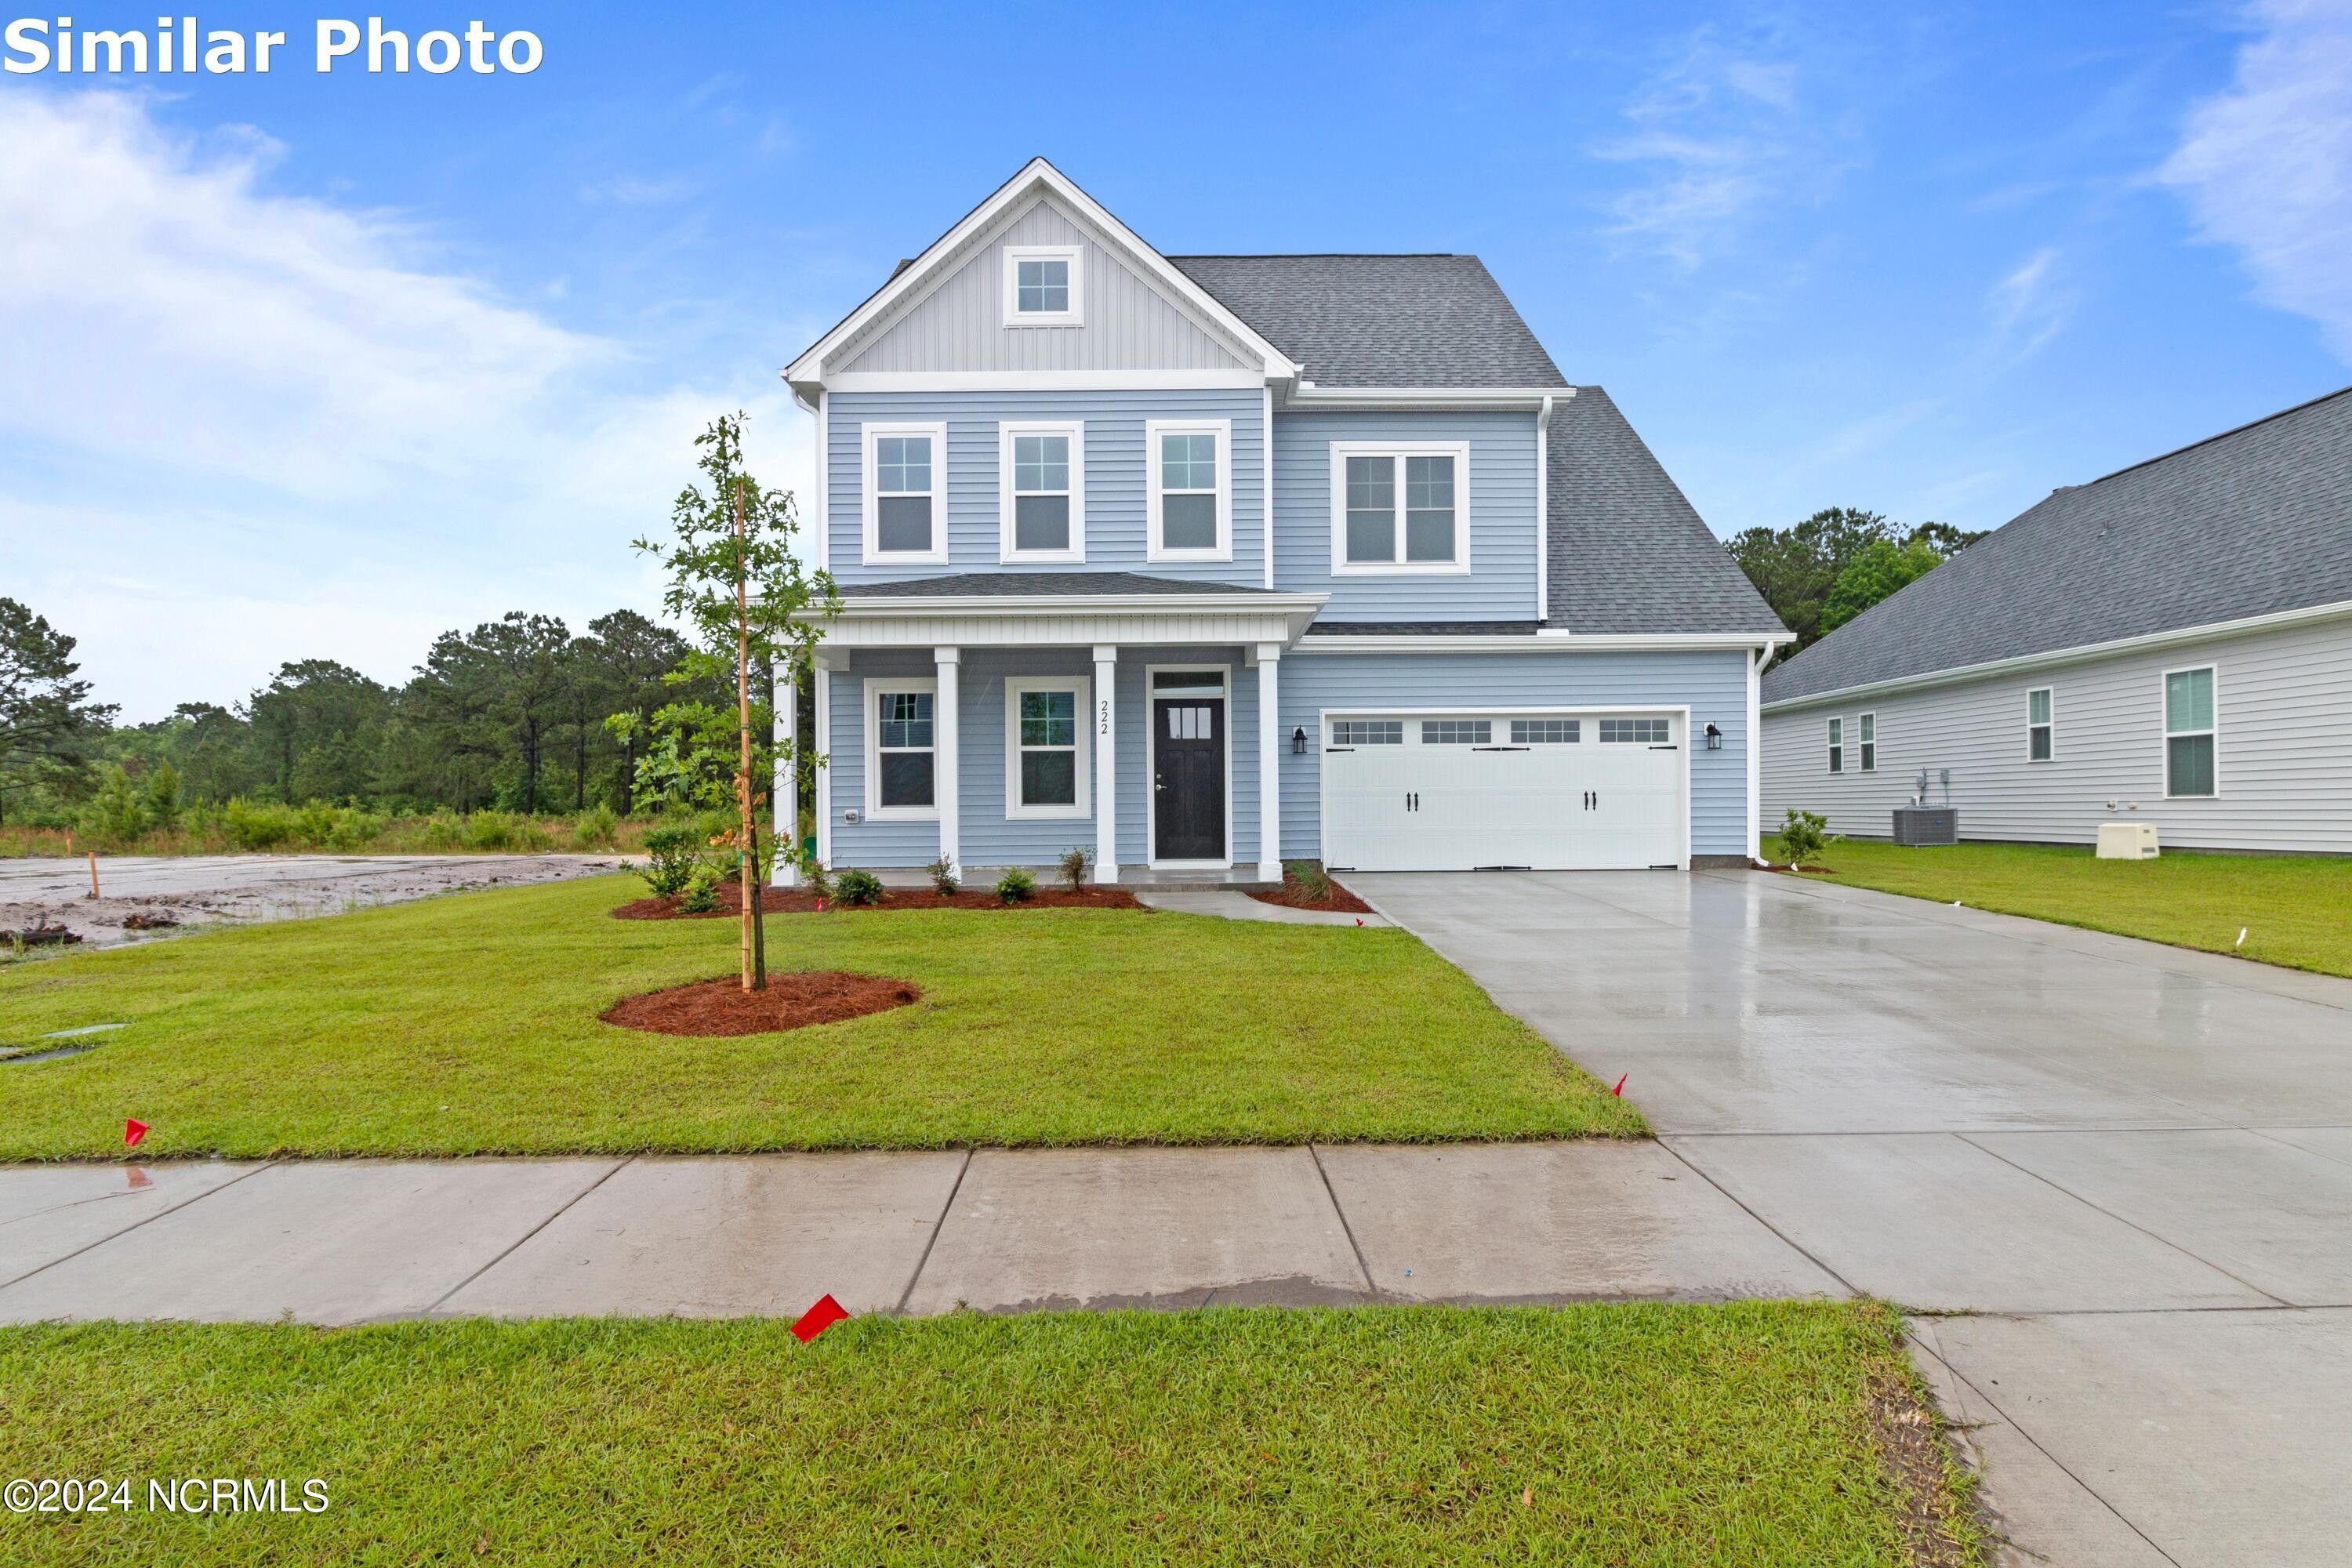 443 Northern Pintail Place. Hampstead, NC 28443